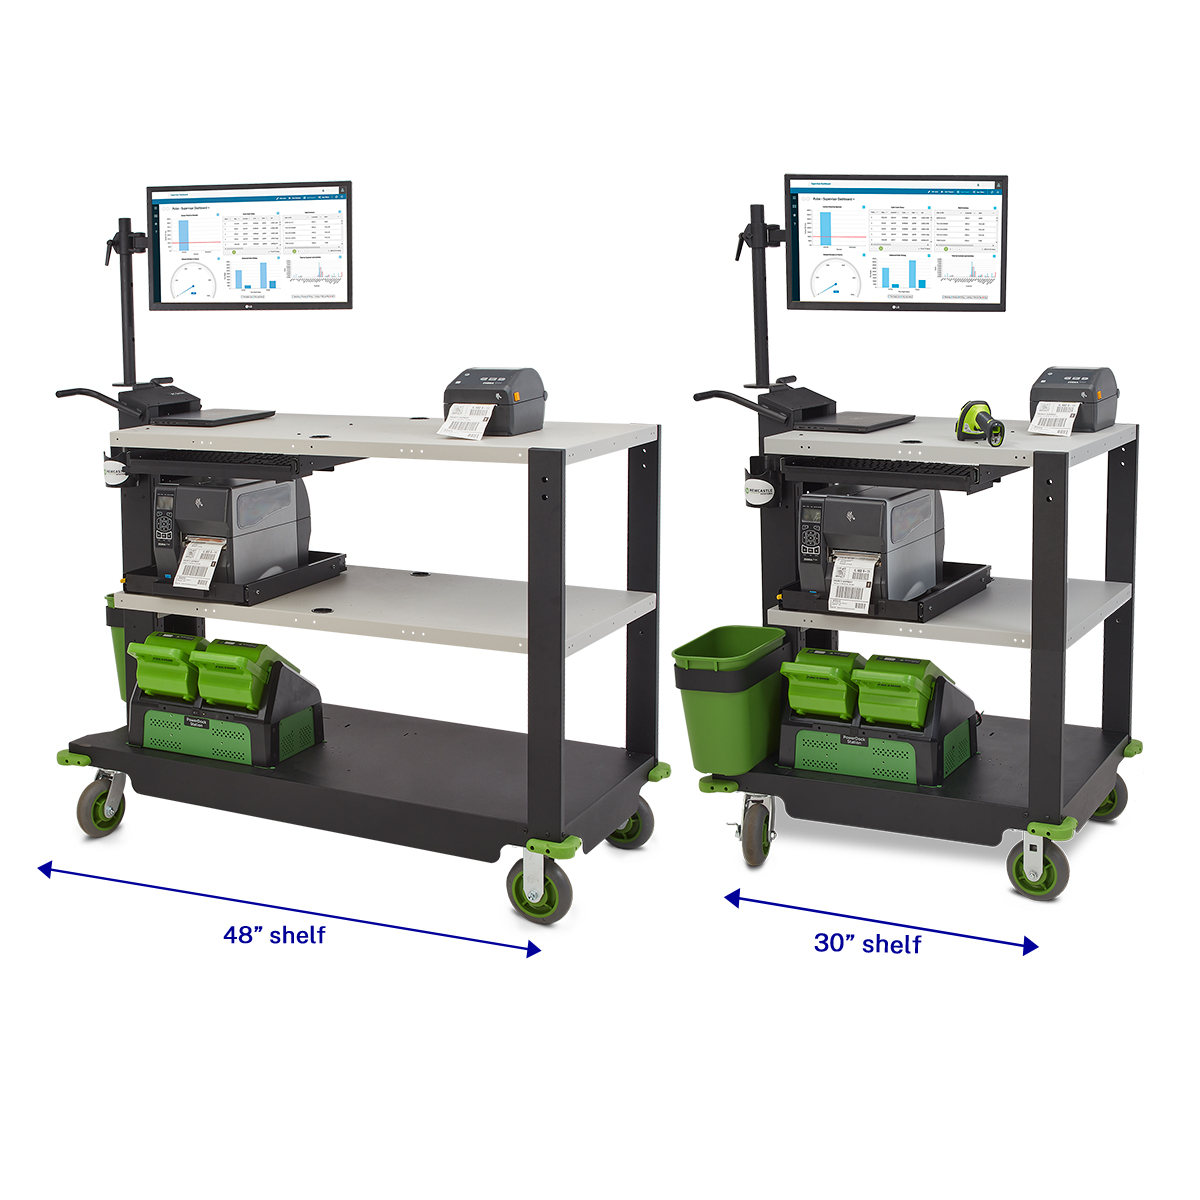 Side by side comparison between two different sized mobile computer work stations